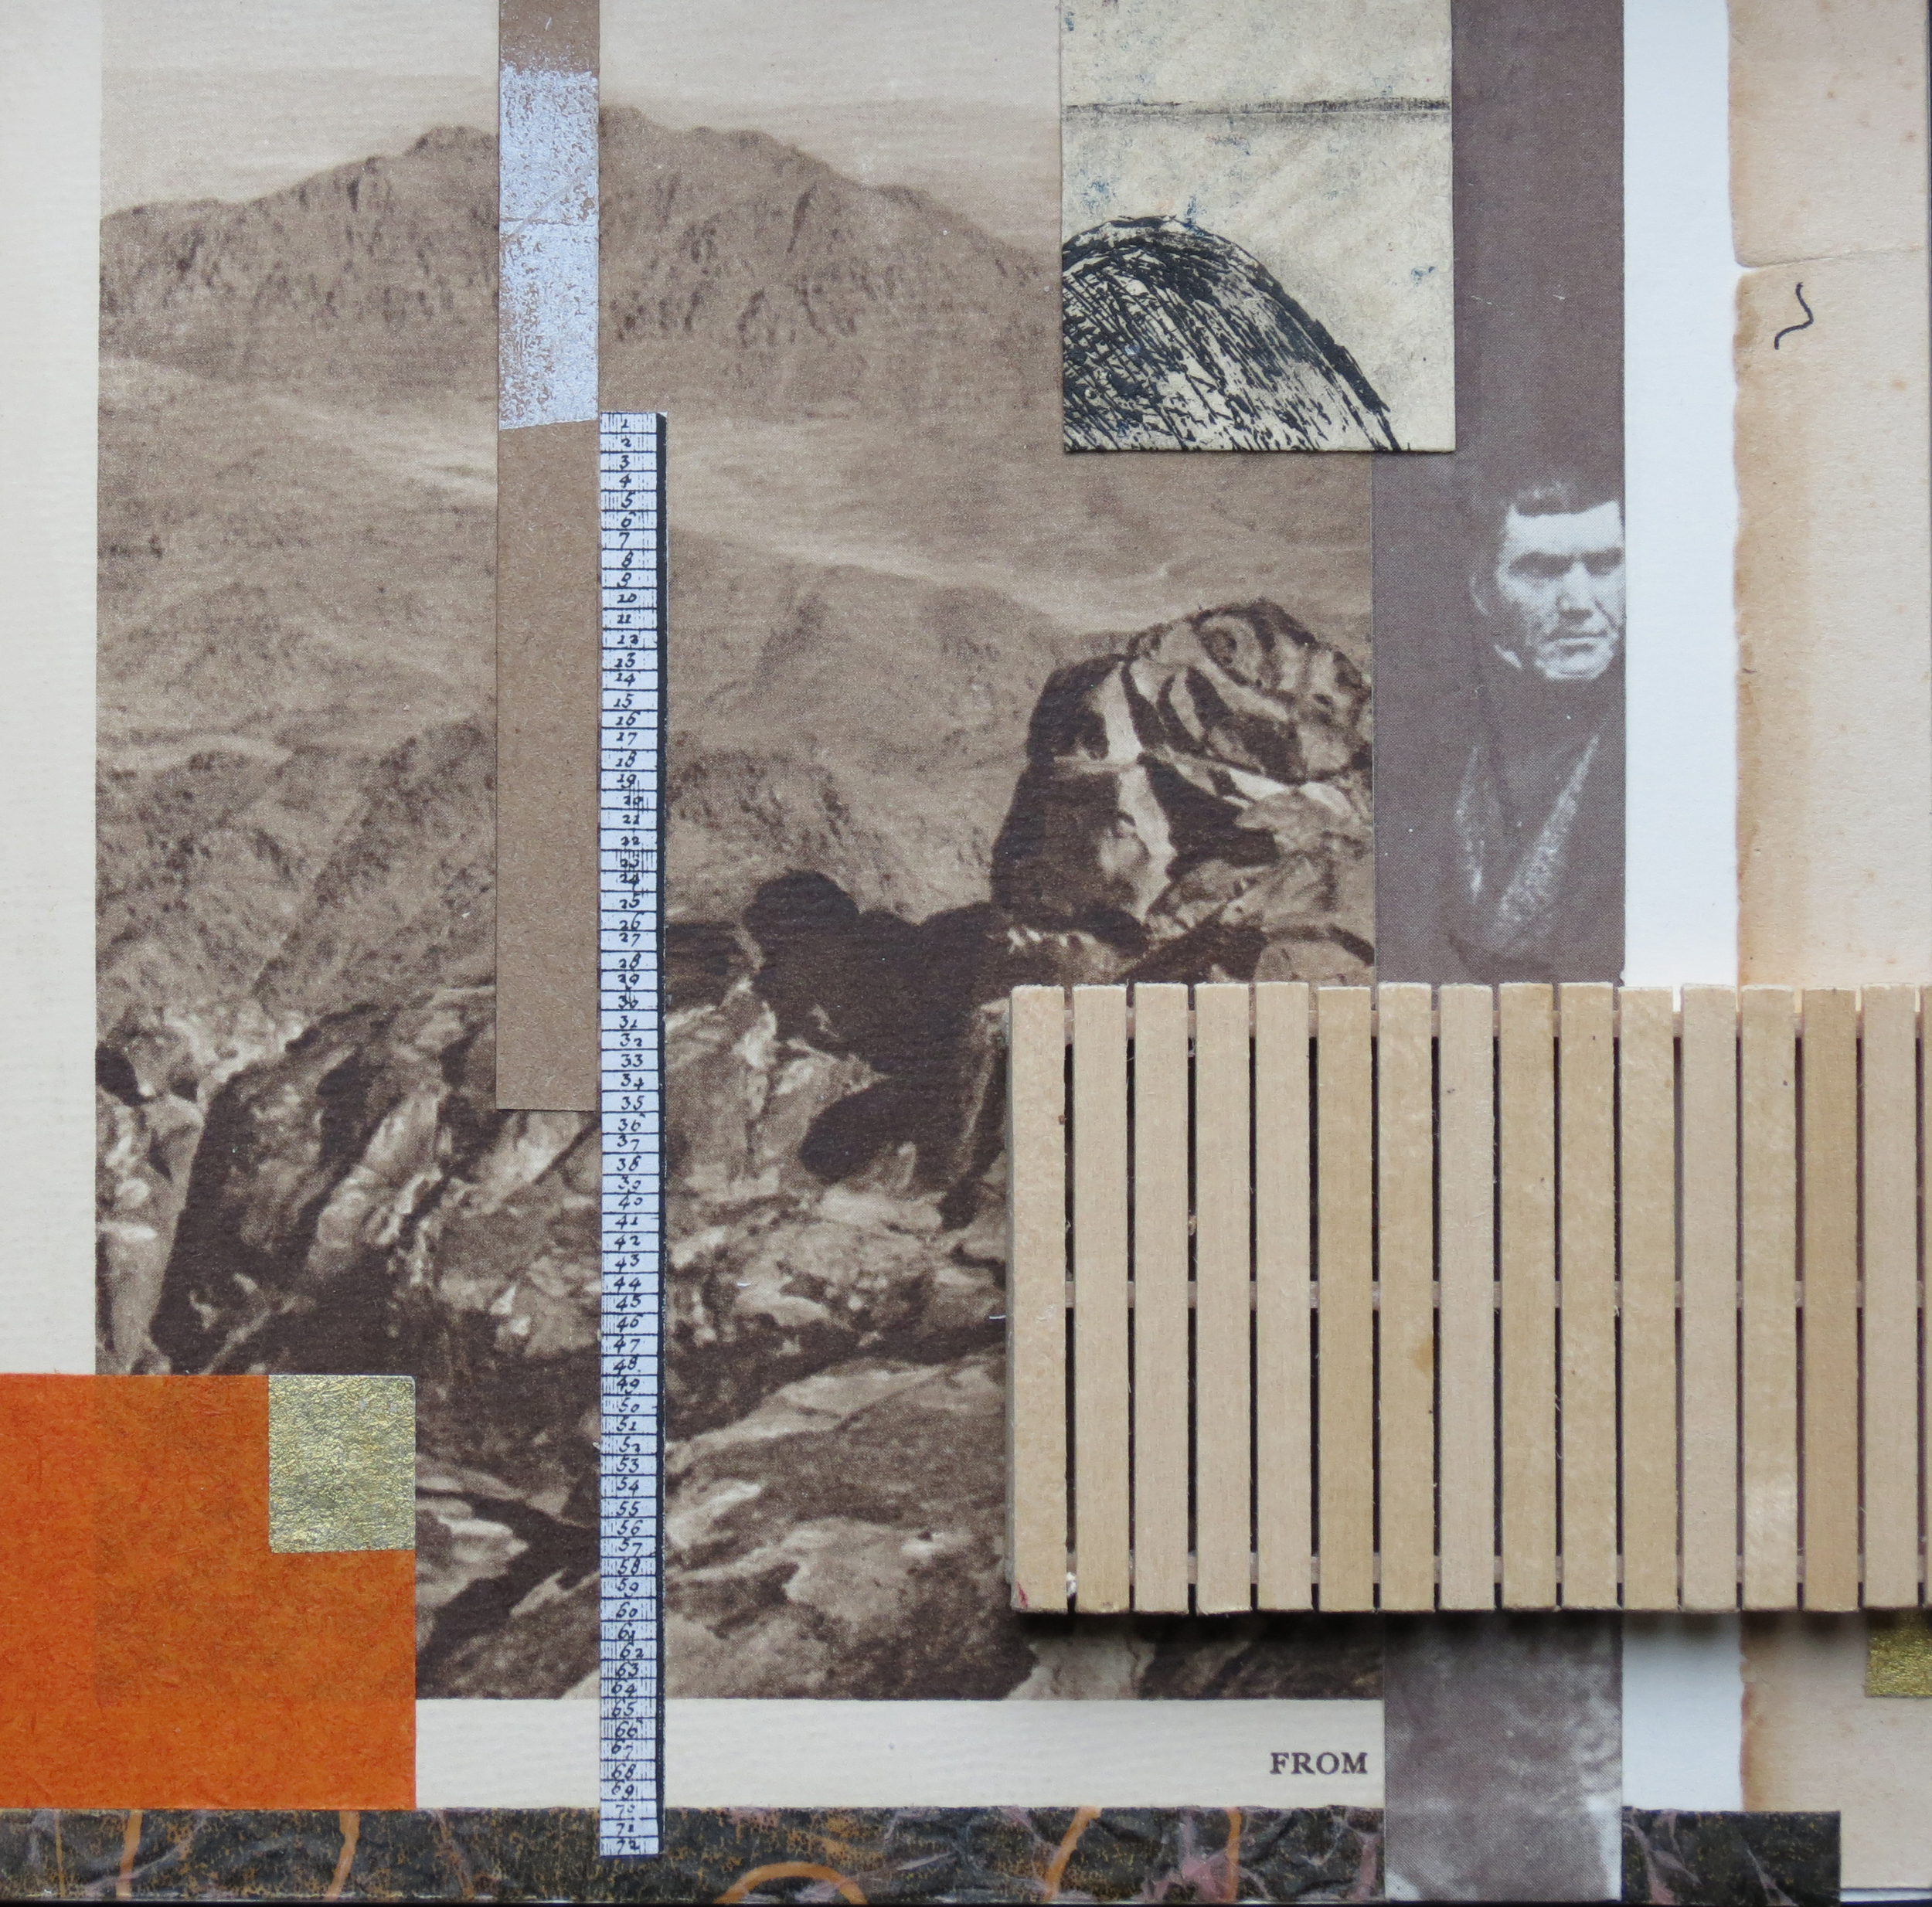  A mixed media collage by Clive Knights from 2014 